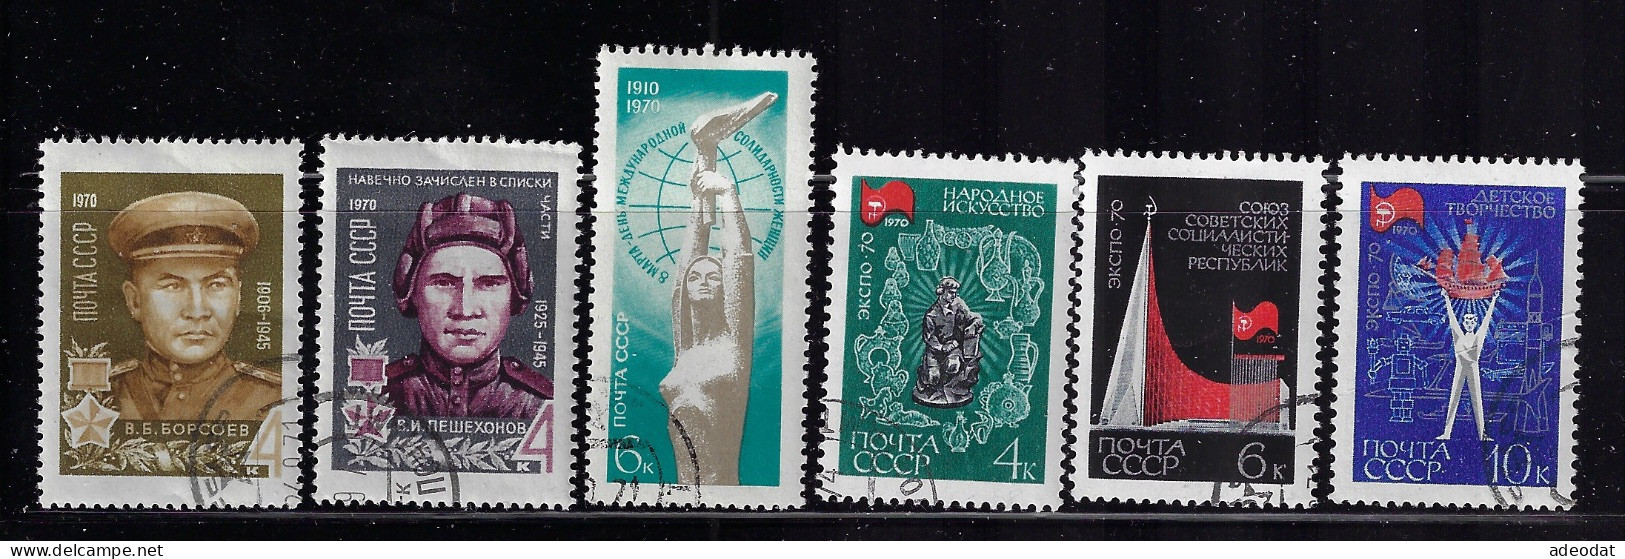 RUSSIA  1970 SCOTT #3702,3703,3705-3708 USED - Used Stamps